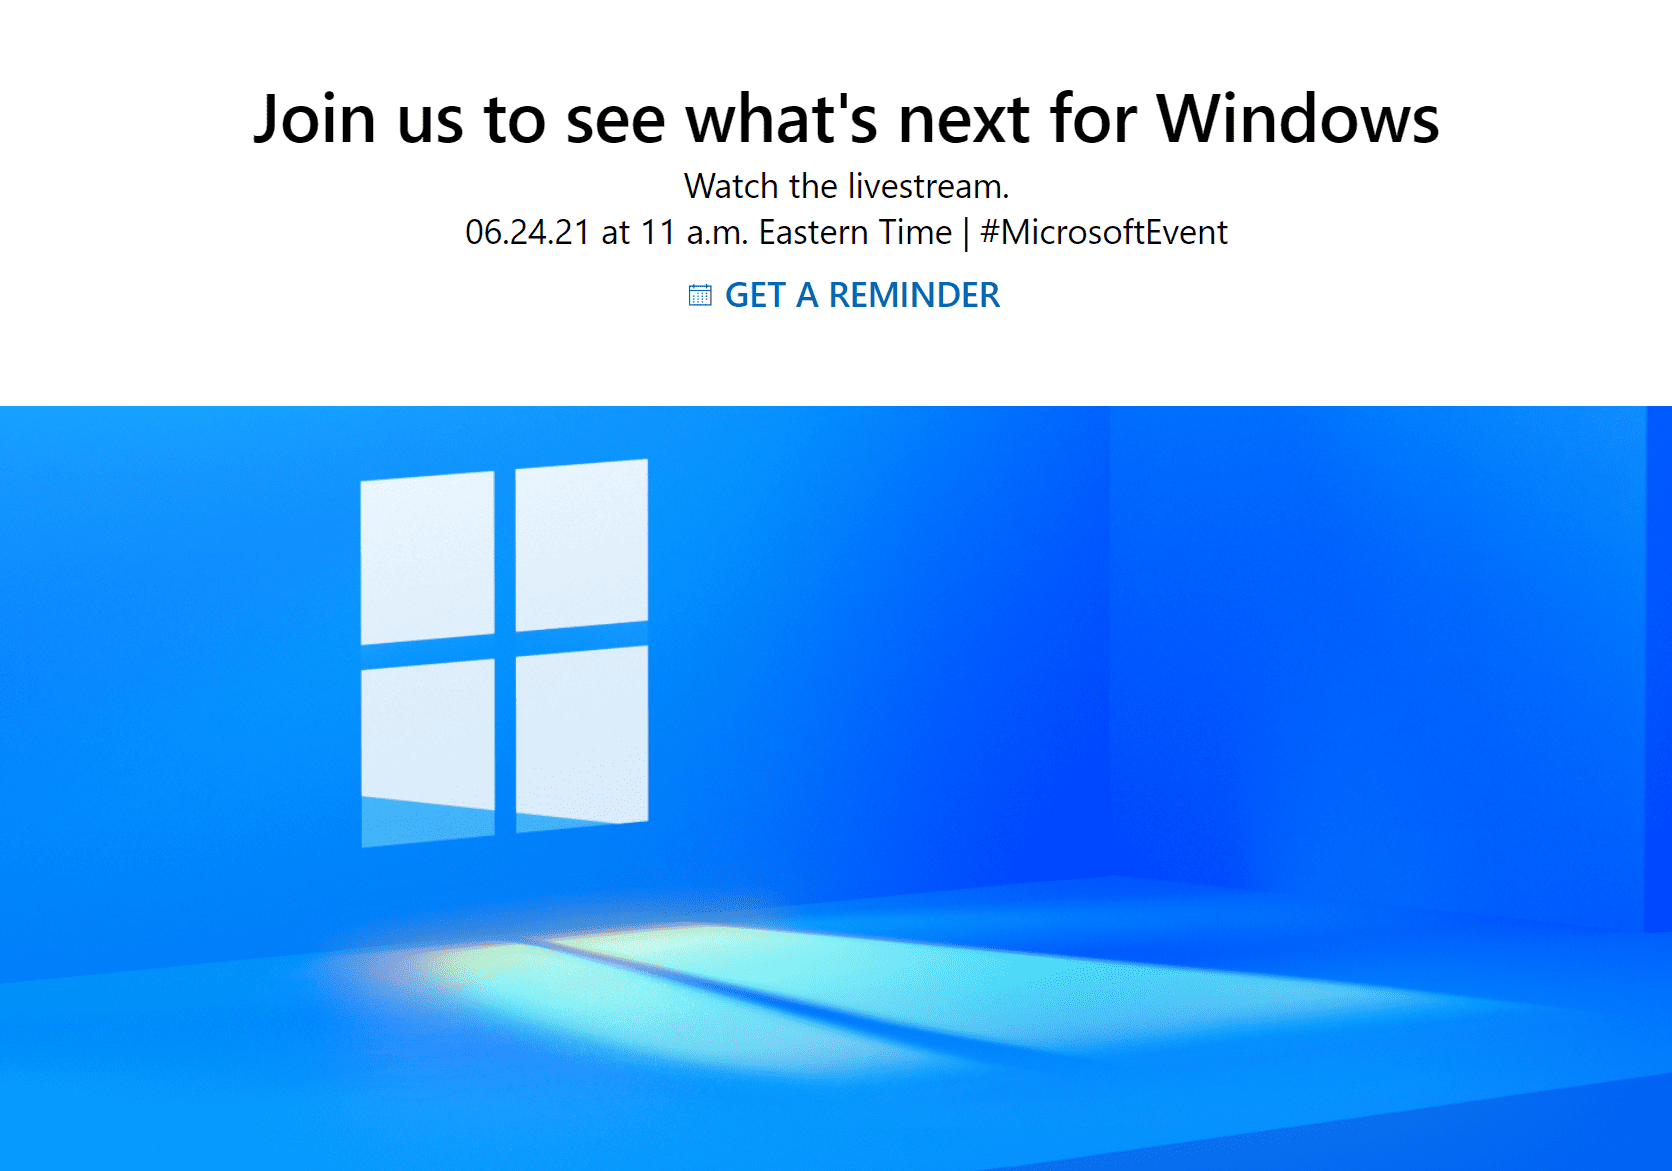 Windows 11 event: here is how to watch Microsoft showcasing “the next version of Windows”